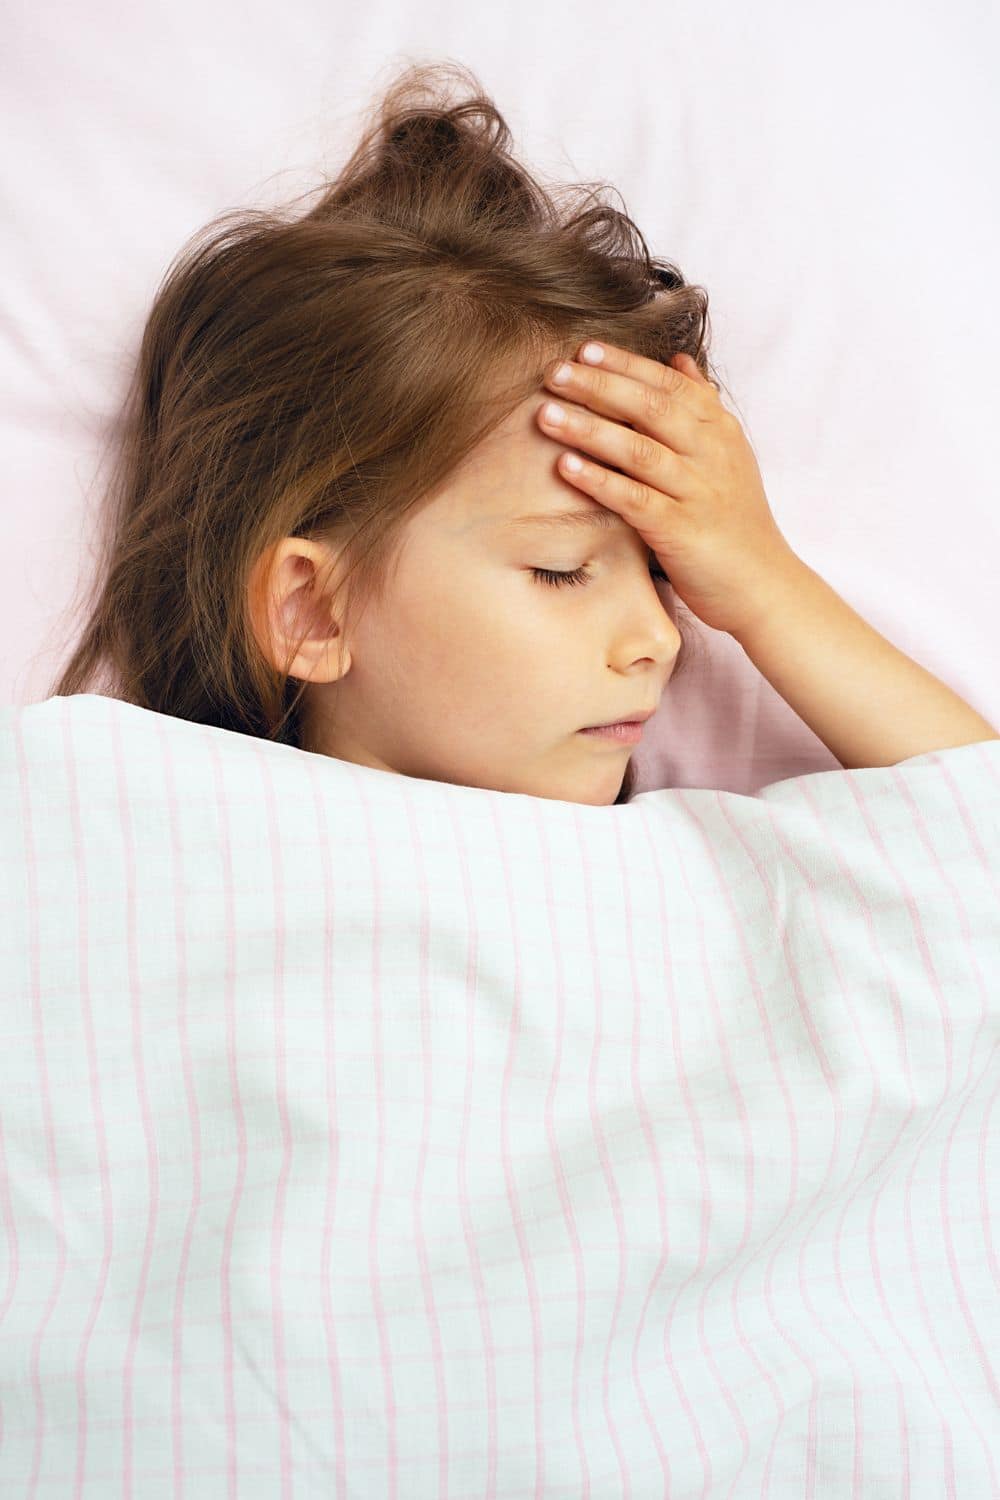 How To Help Your Children When They Get Hurt Or Sick